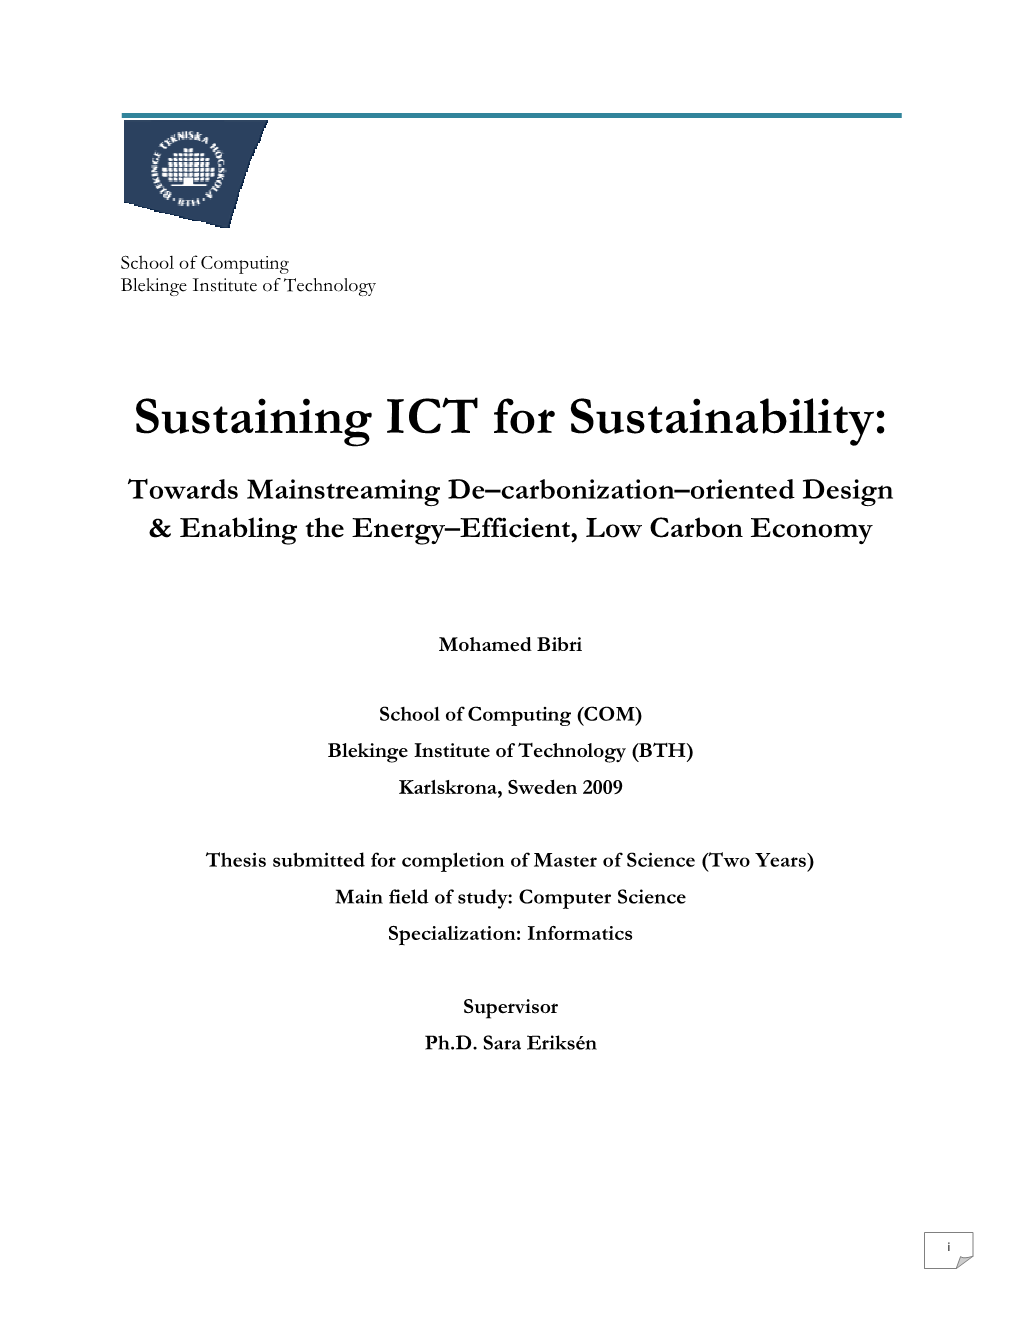 Sustaining ICT for Sustainability: Towards Mainstreaming De–Carbonization–Oriented Design & Enabling the Energy–Efficient, Low Carbon Economy